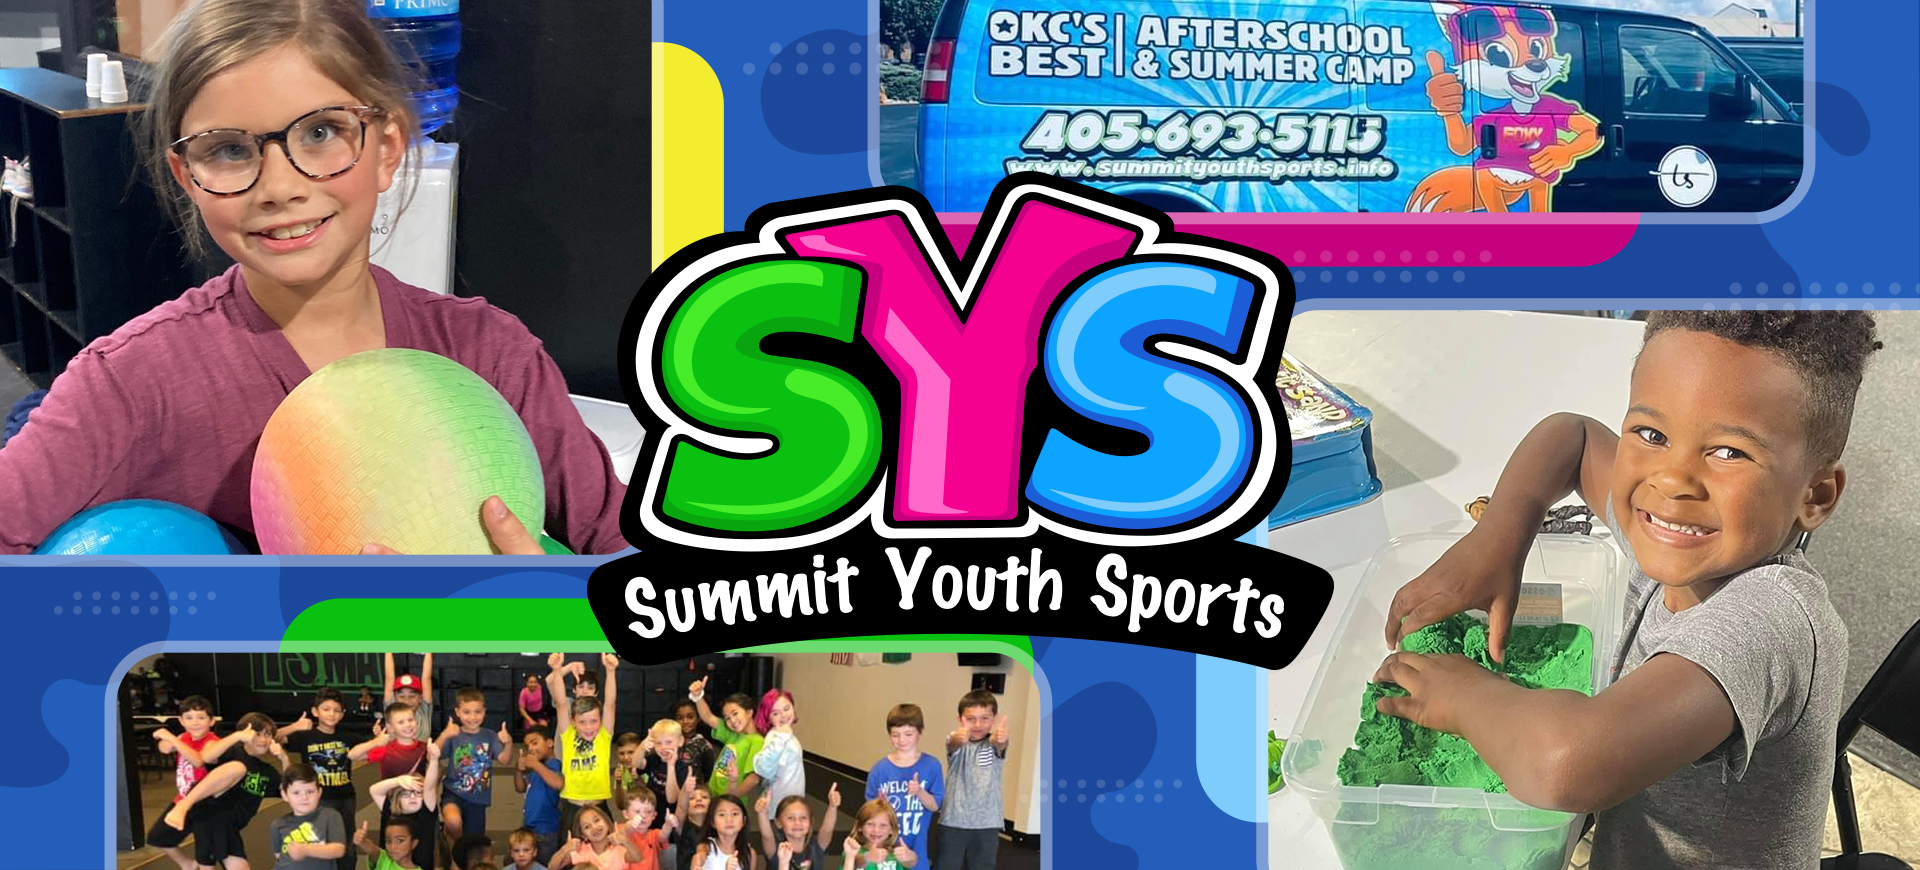 Summit Youth Sports in Oklahoma City Banner